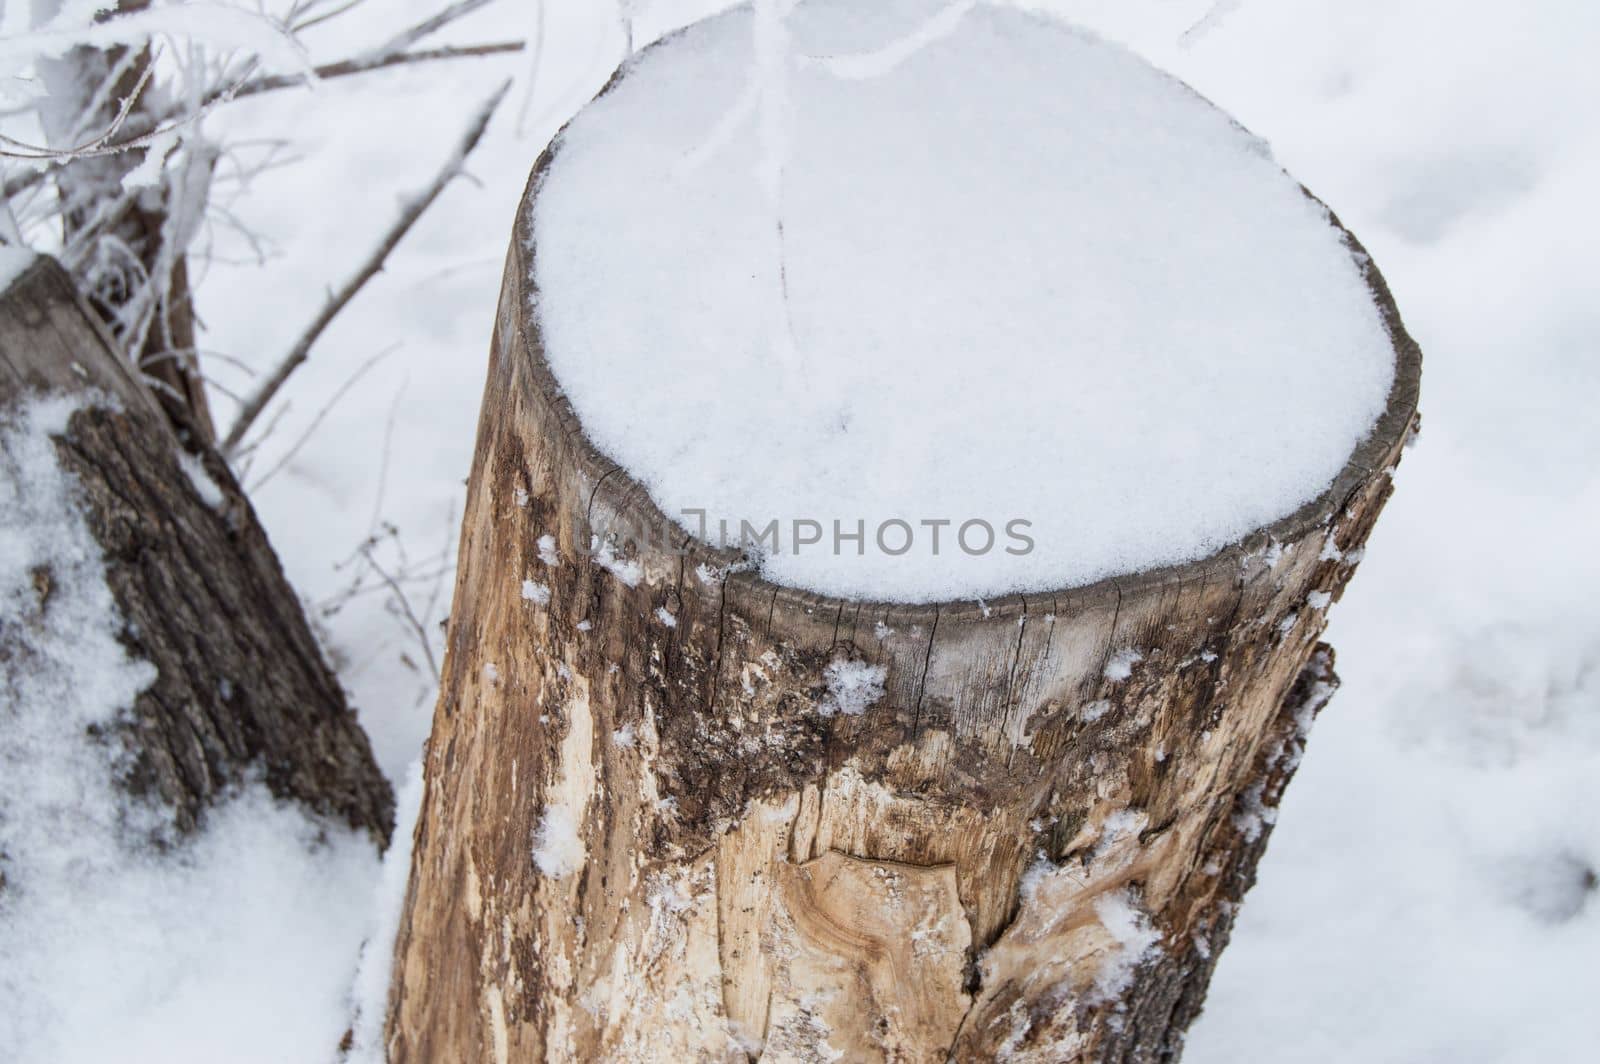 Old tree stump covered with snow in winter forest, Park on a cold day.